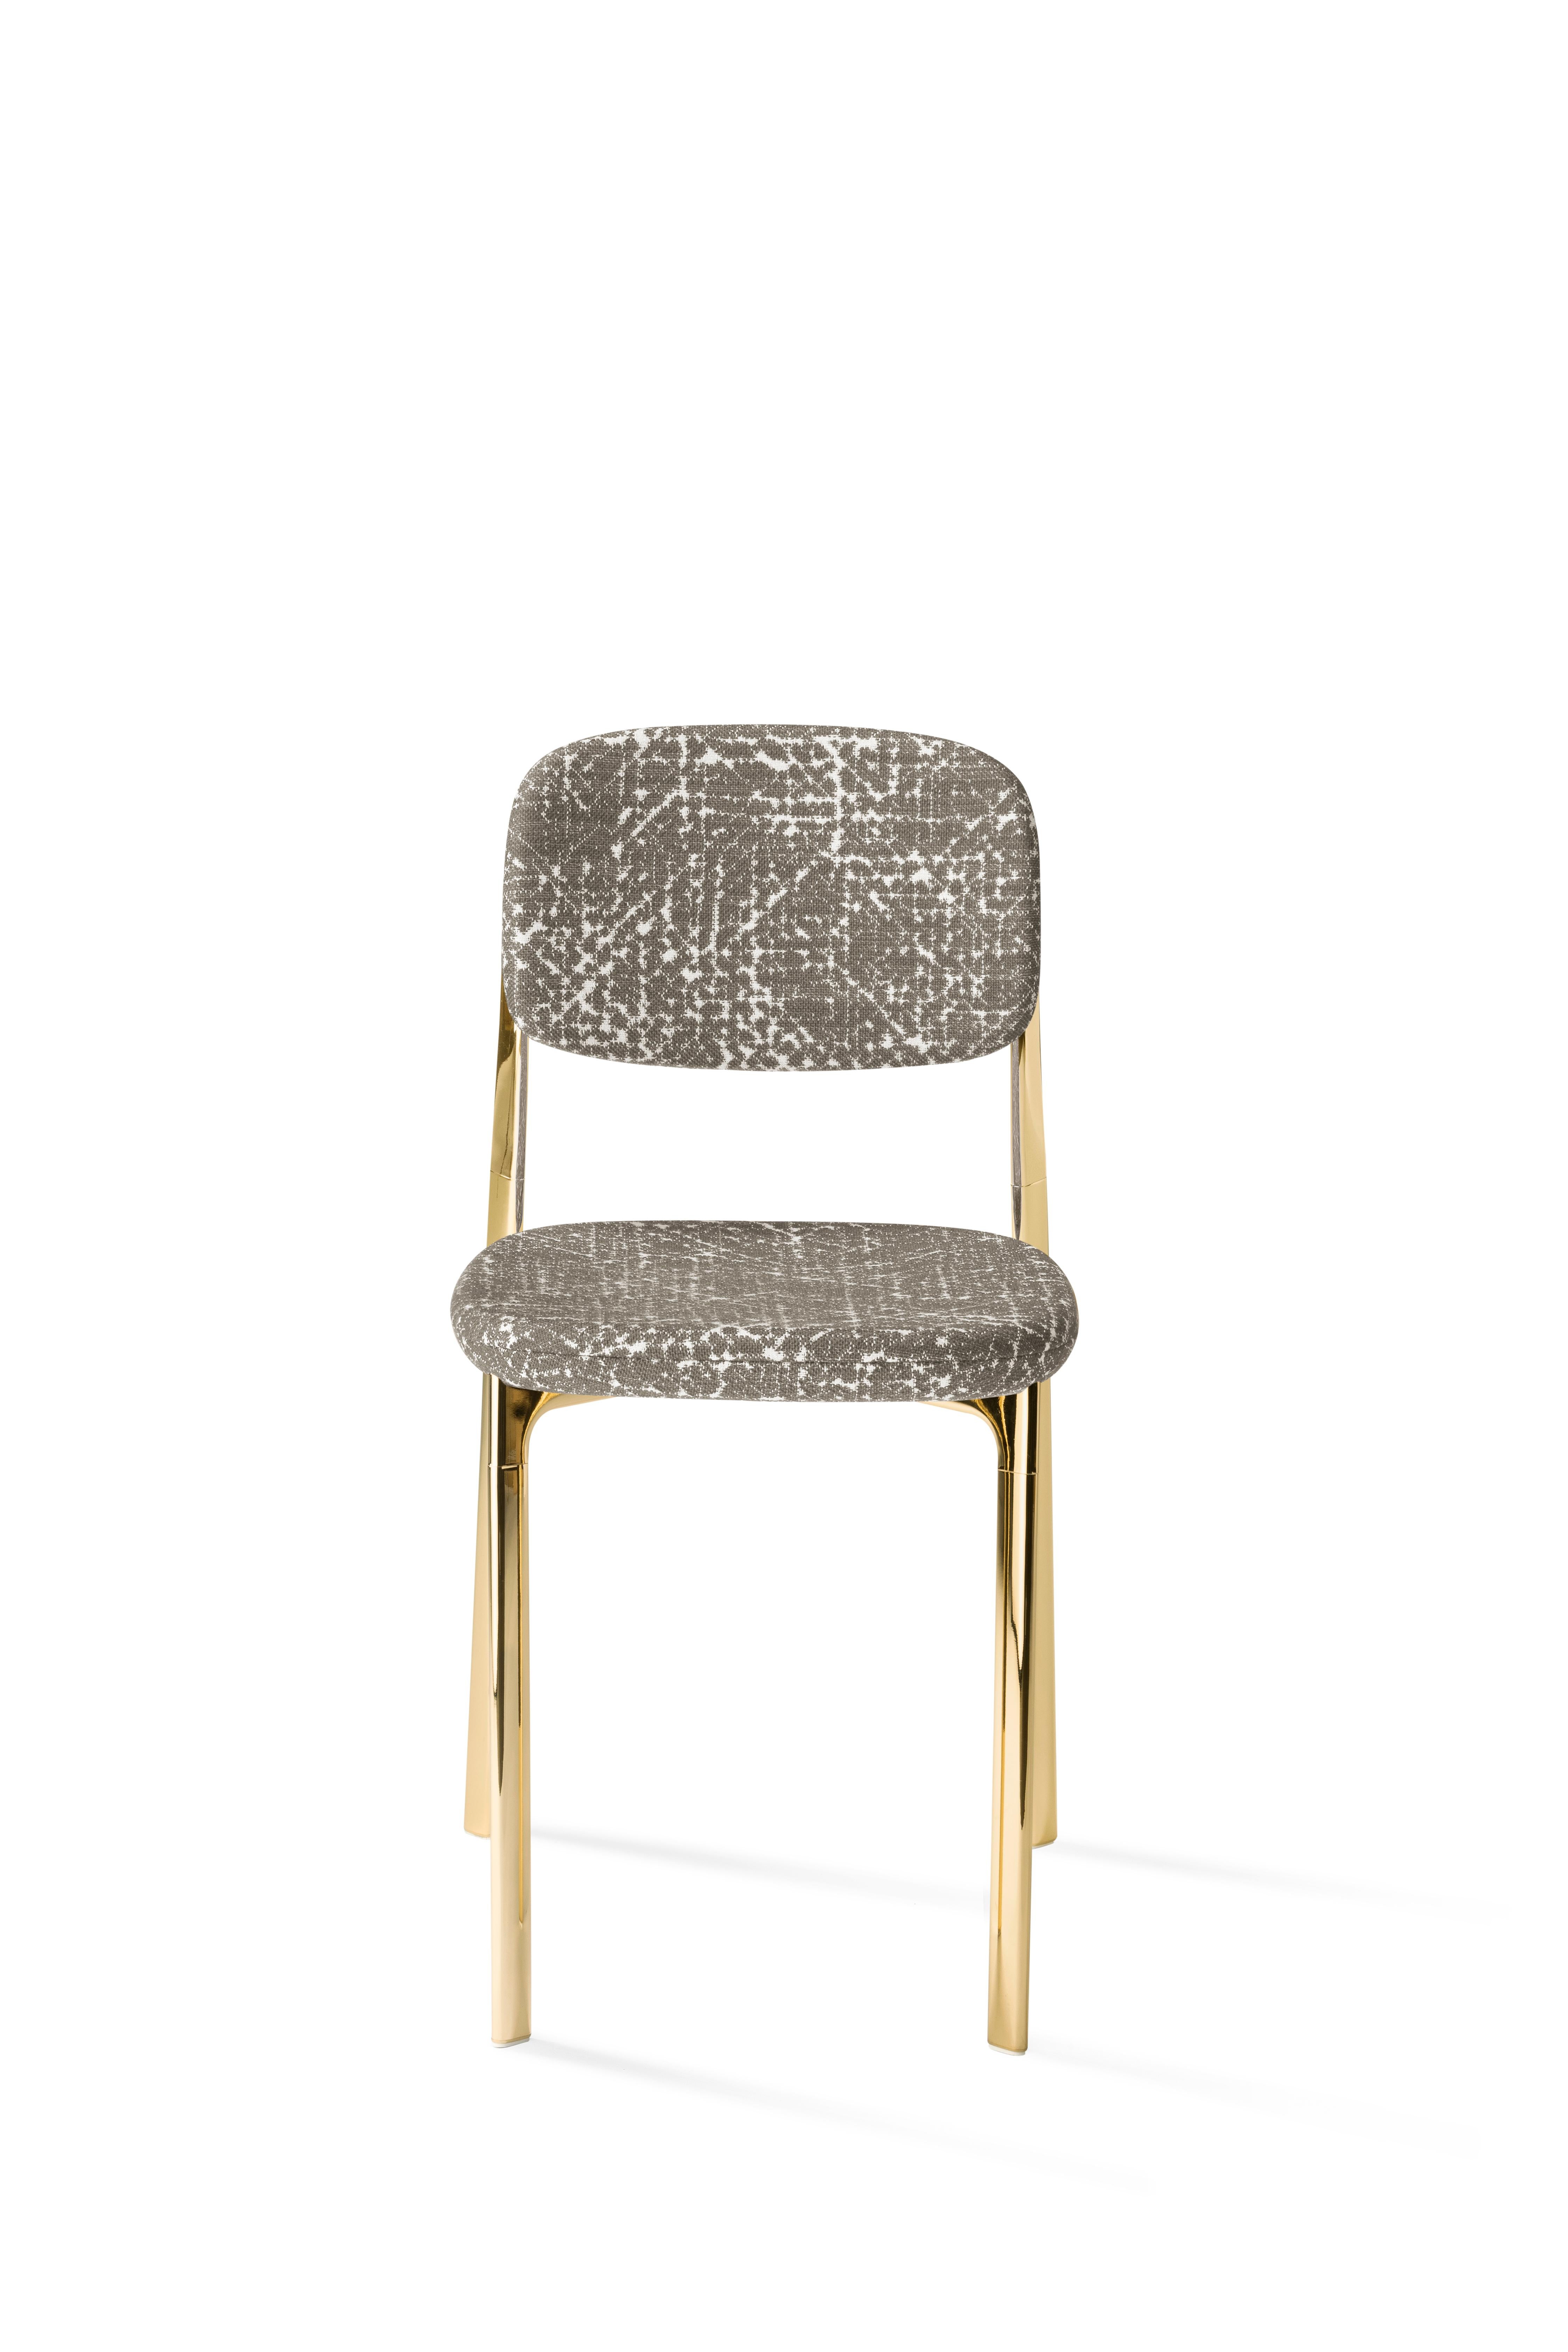 Inspired by the Northern California coastline, the Coast Chair’s design draws its influence from a landscape of wandering, golden hills and the meandering roads that intersect them. Blending refined architectural elements with fluid gestures, the